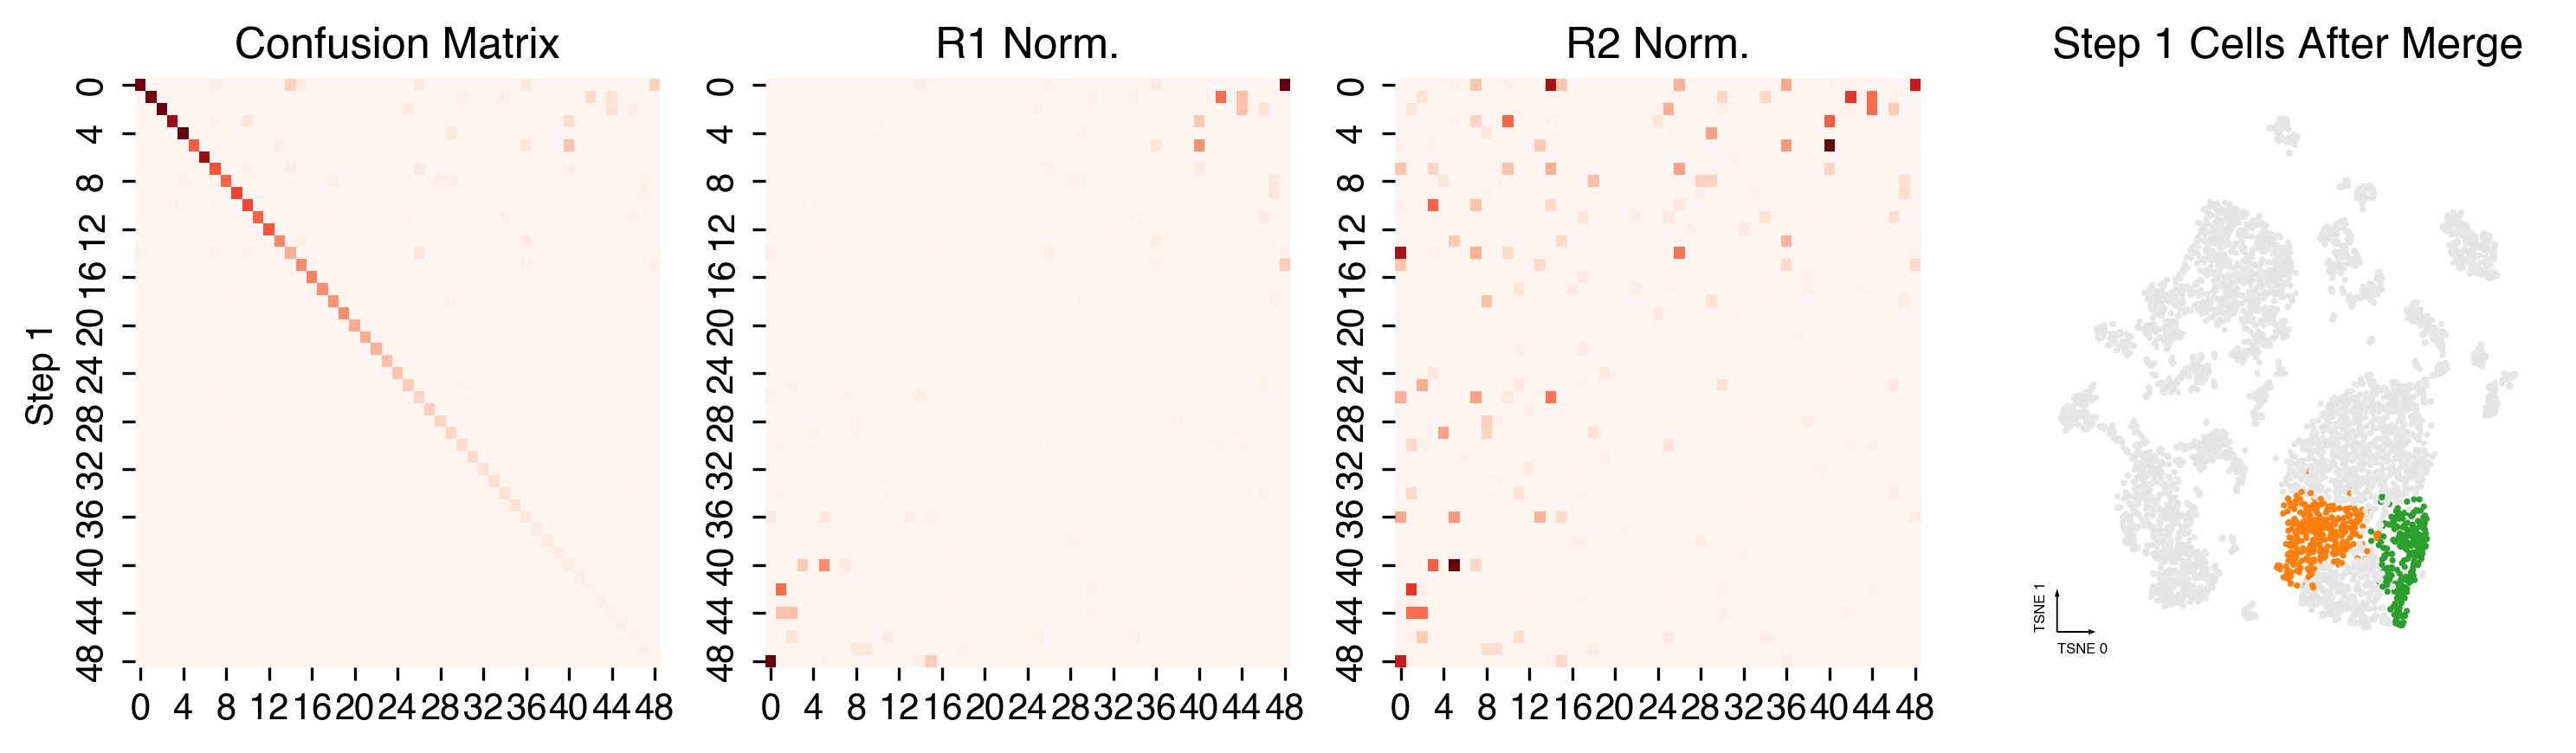 ../../../_images/06-Clustering_16_1.png